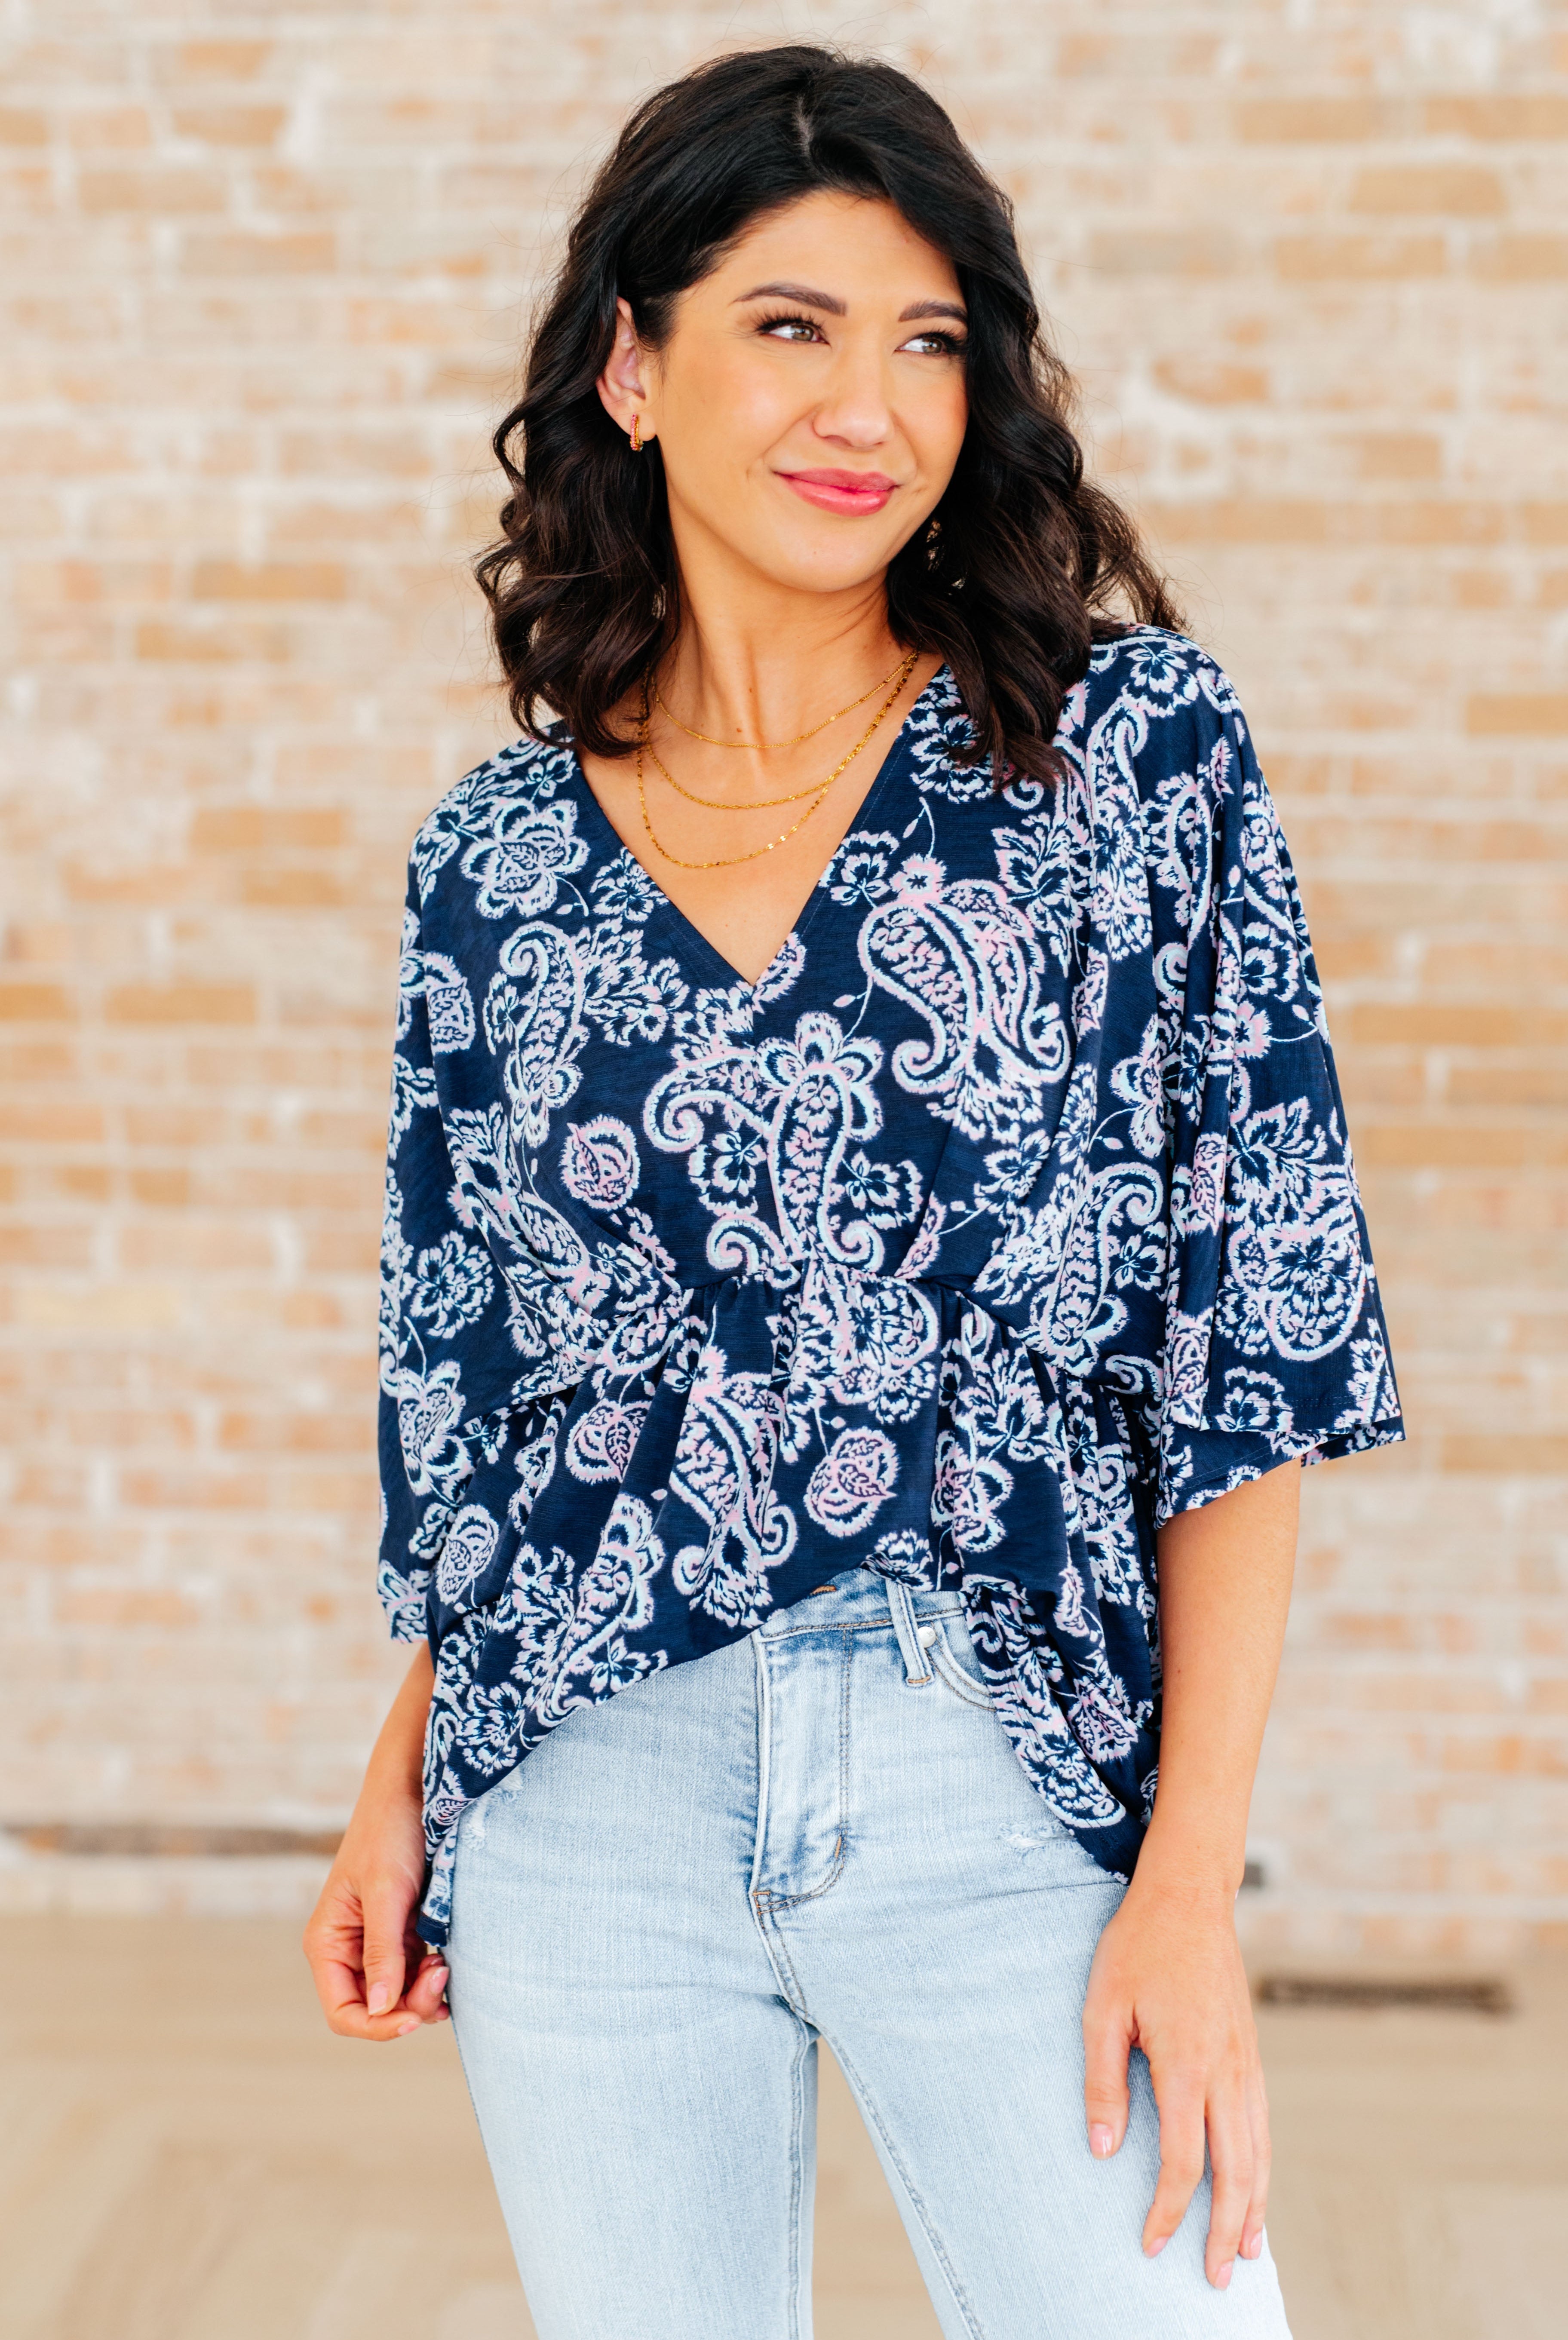 Dreamer Peplum Top in Navy and Pink Paisley-Tops-Ave Shops-Urban Threadz Boutique, Women's Fashion Boutique in Saugatuck, MI